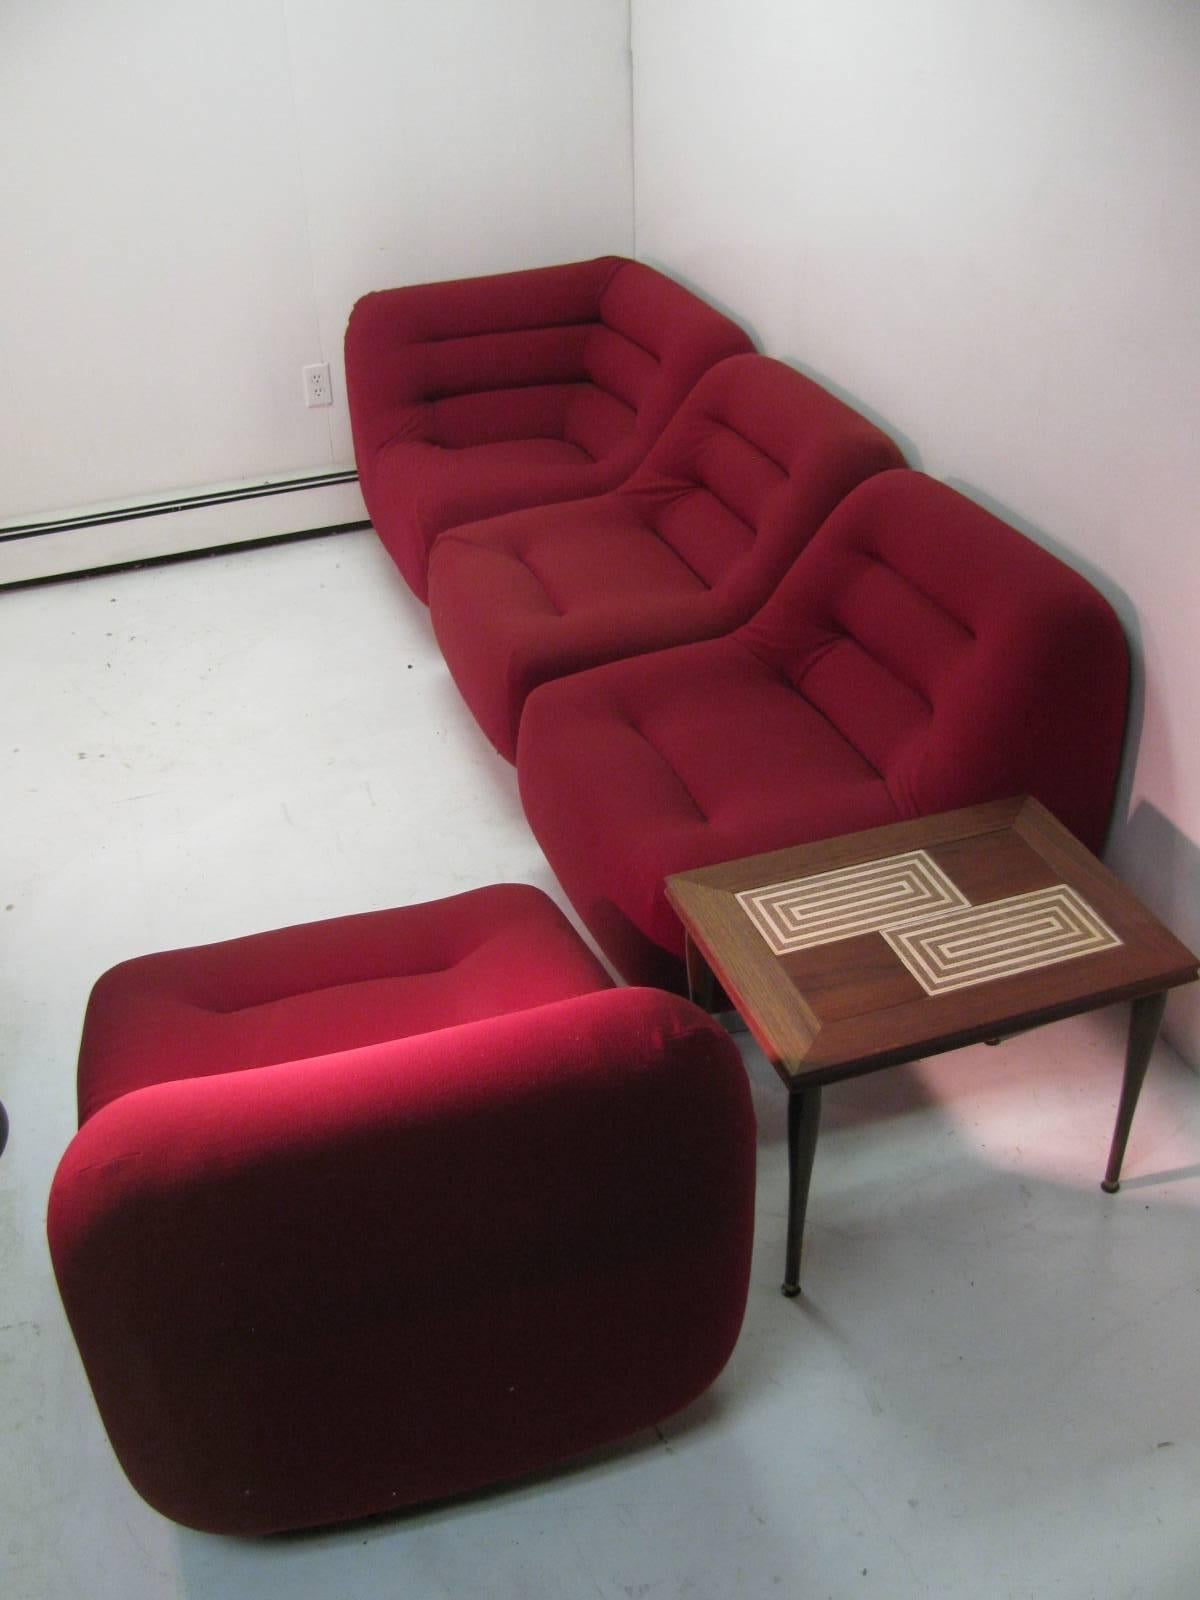 Late 20th Century Rare & Exceptional Mid Century Modern Sectional Tomorrow Sofa by M. F. Harty